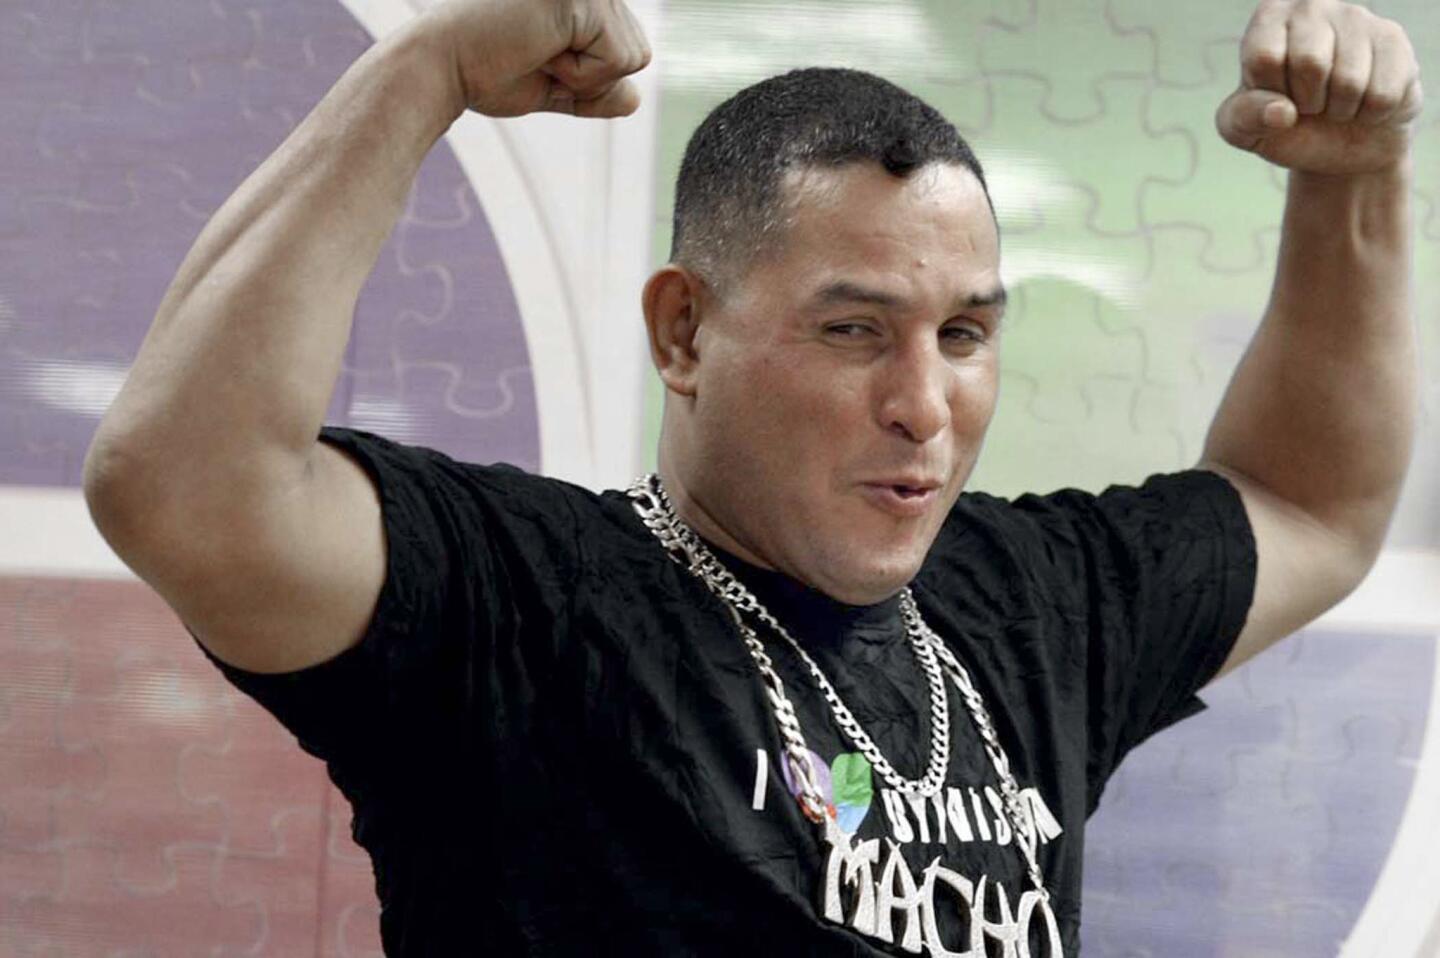 Former Puerto Rican welterweight boxing champion Hector 'Macho'